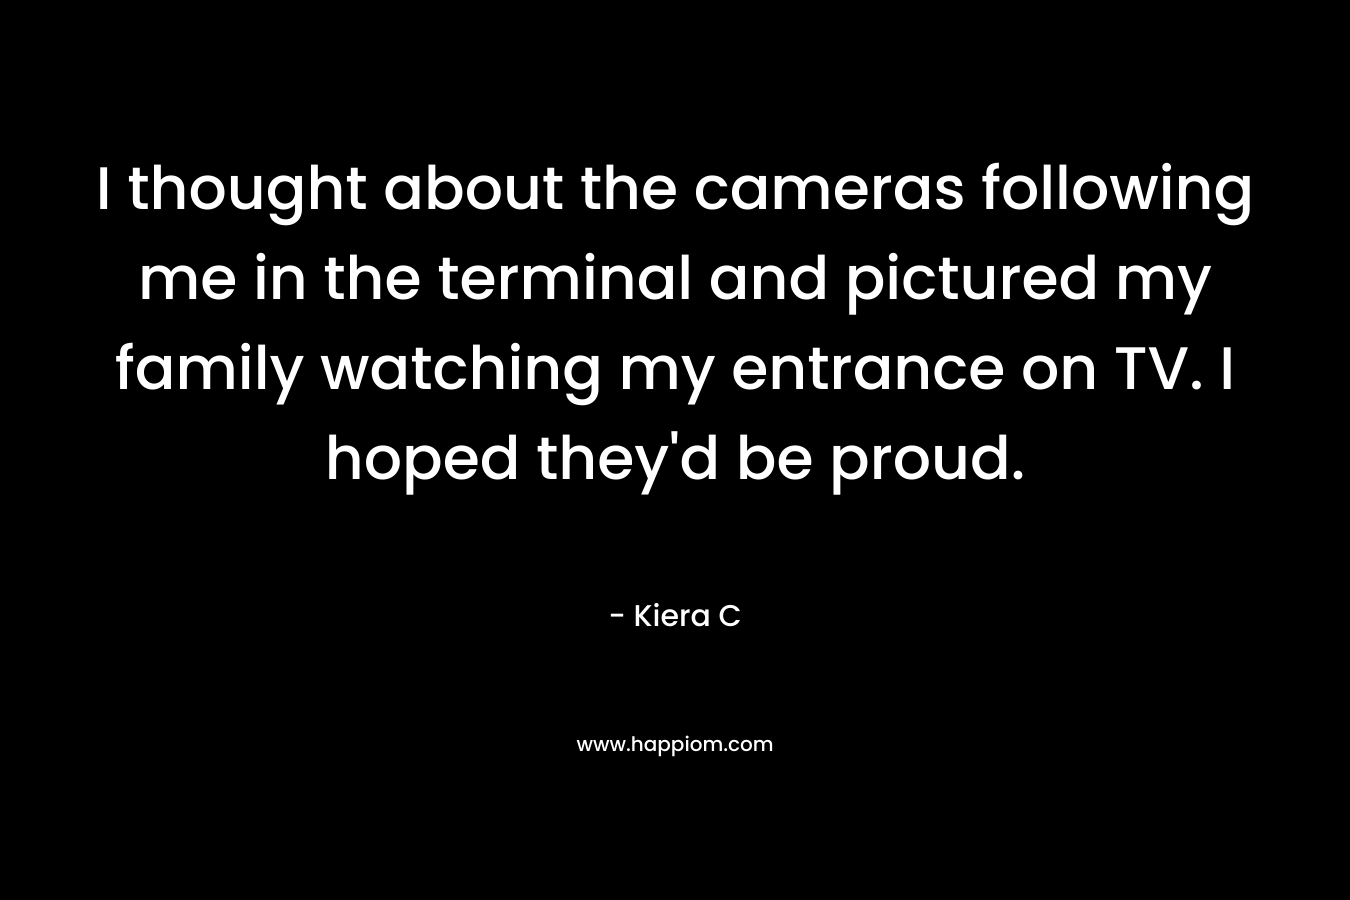 I thought about the cameras following me in the terminal and pictured my family watching my entrance on TV. I hoped they’d be proud. – Kiera C